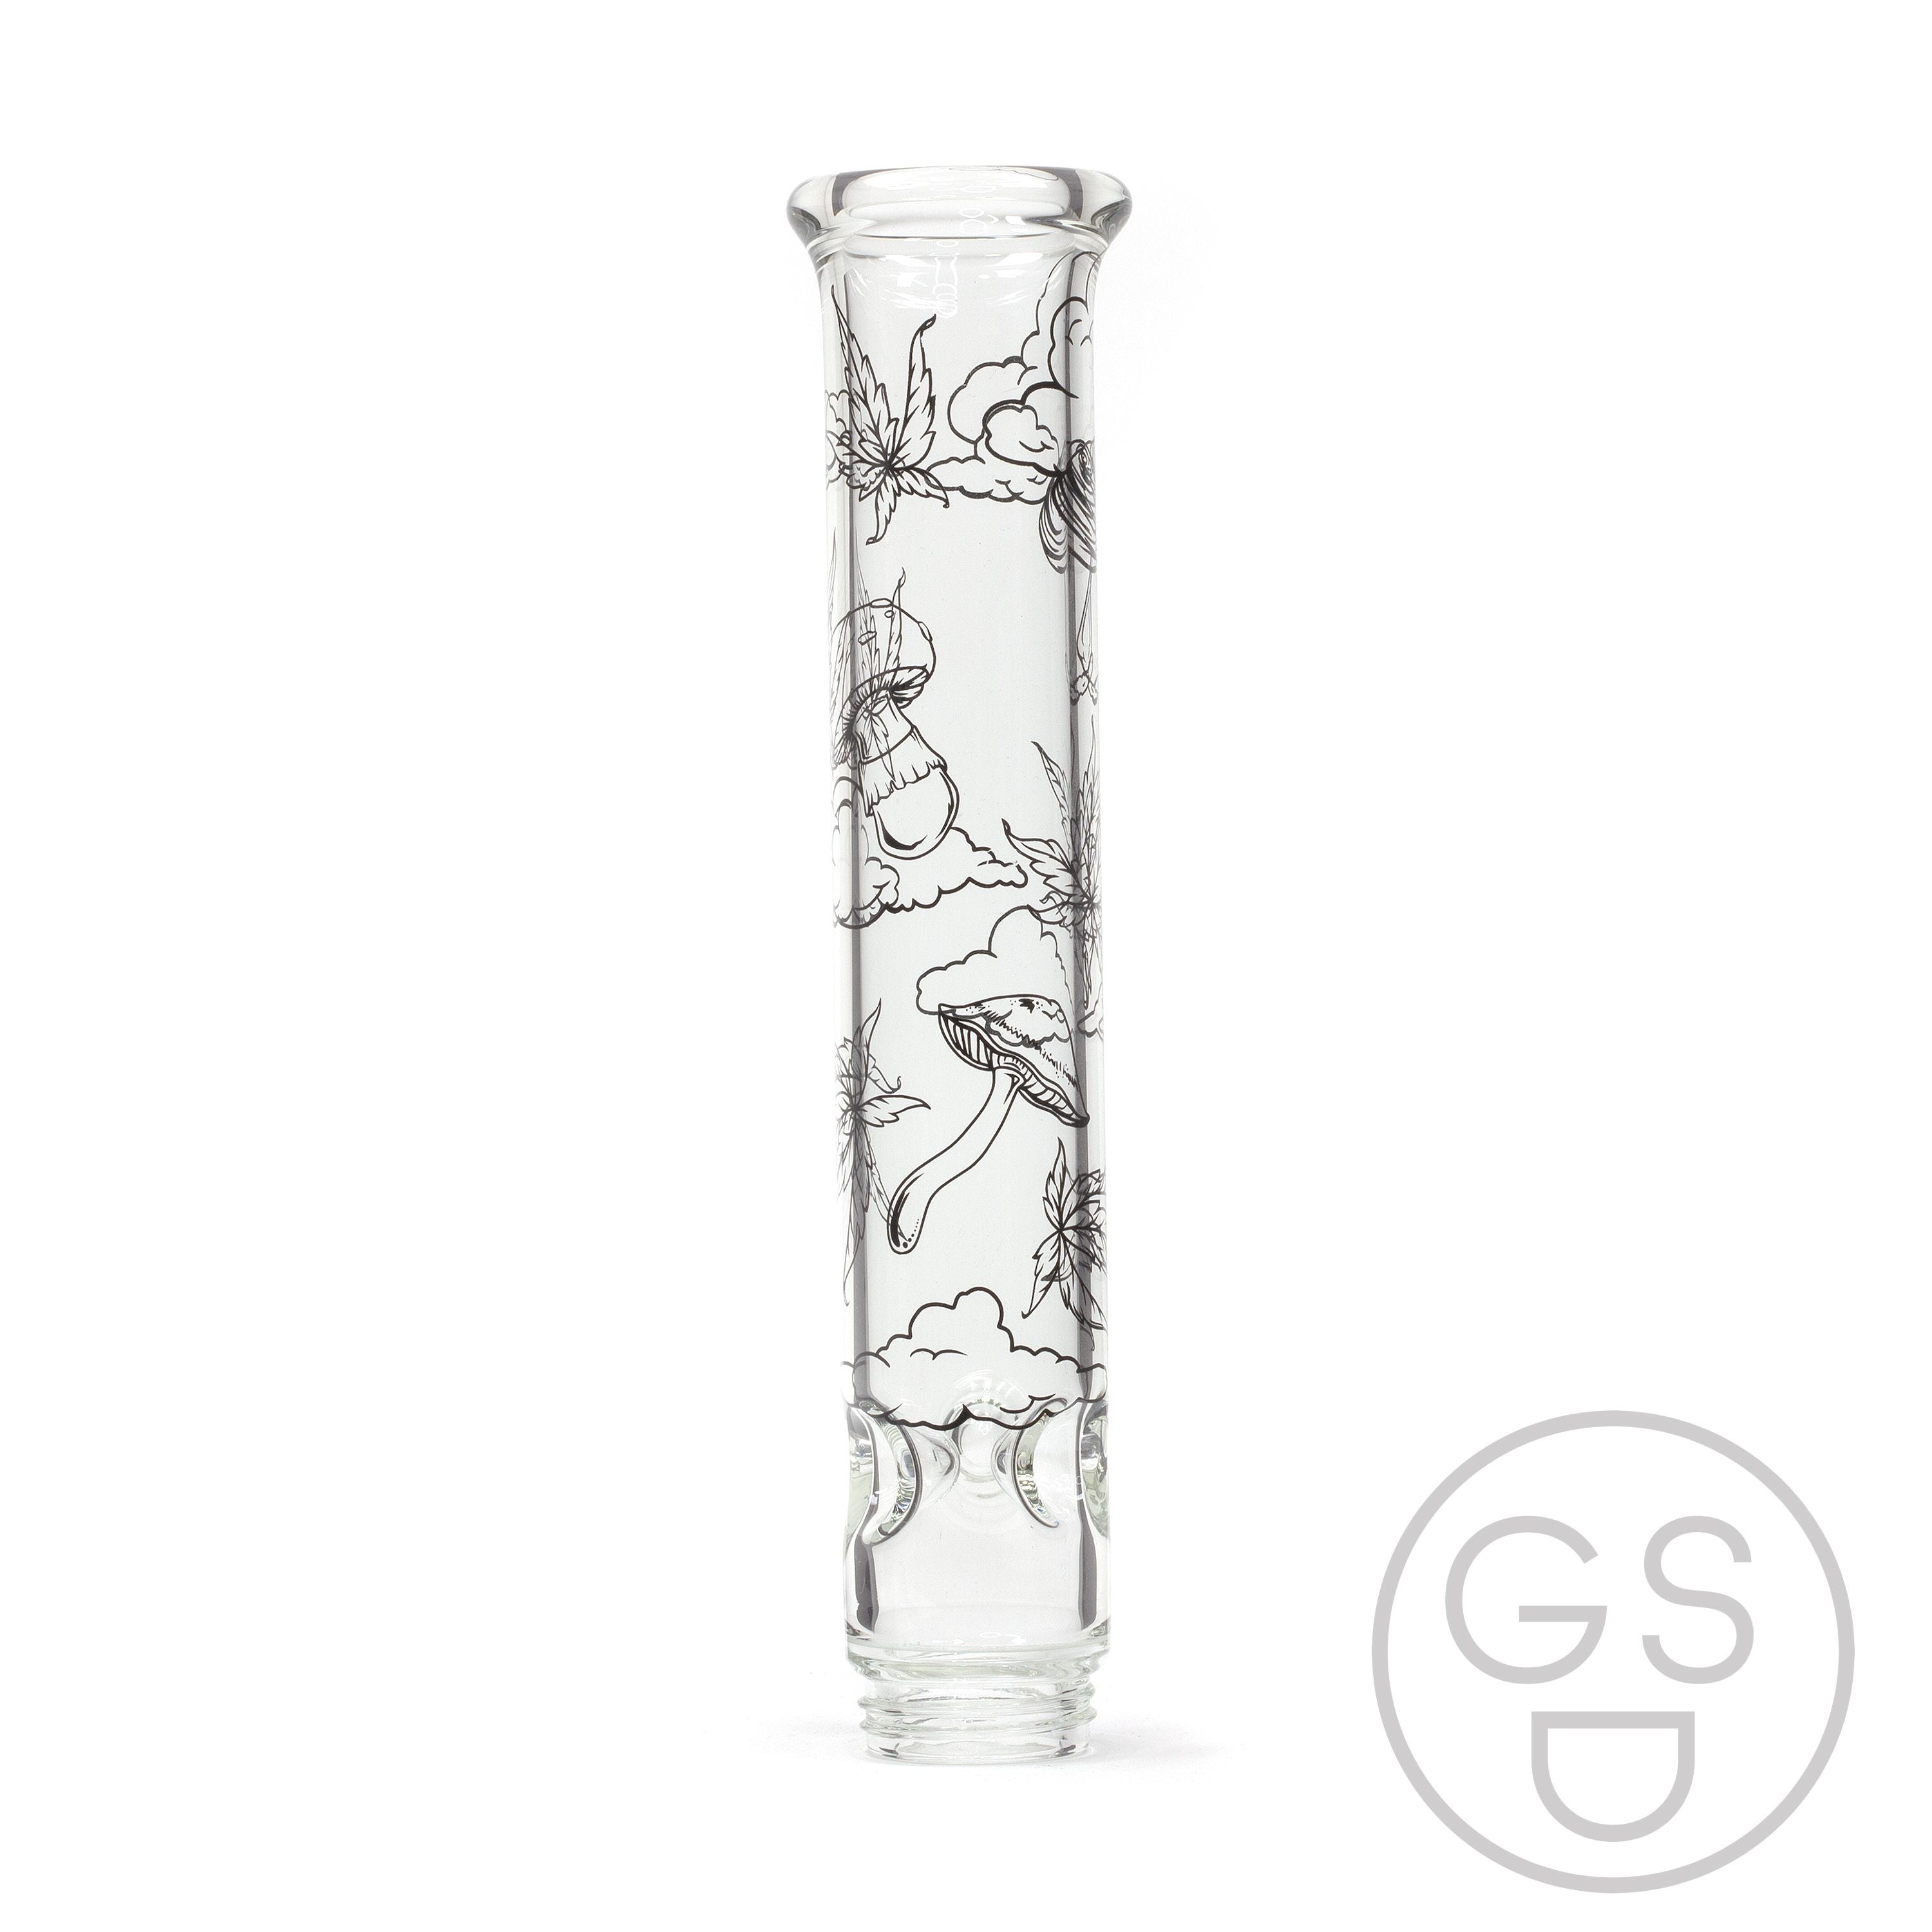 Prism Modular Waterpipe Tall Mouthpiece - Sky High / Clear